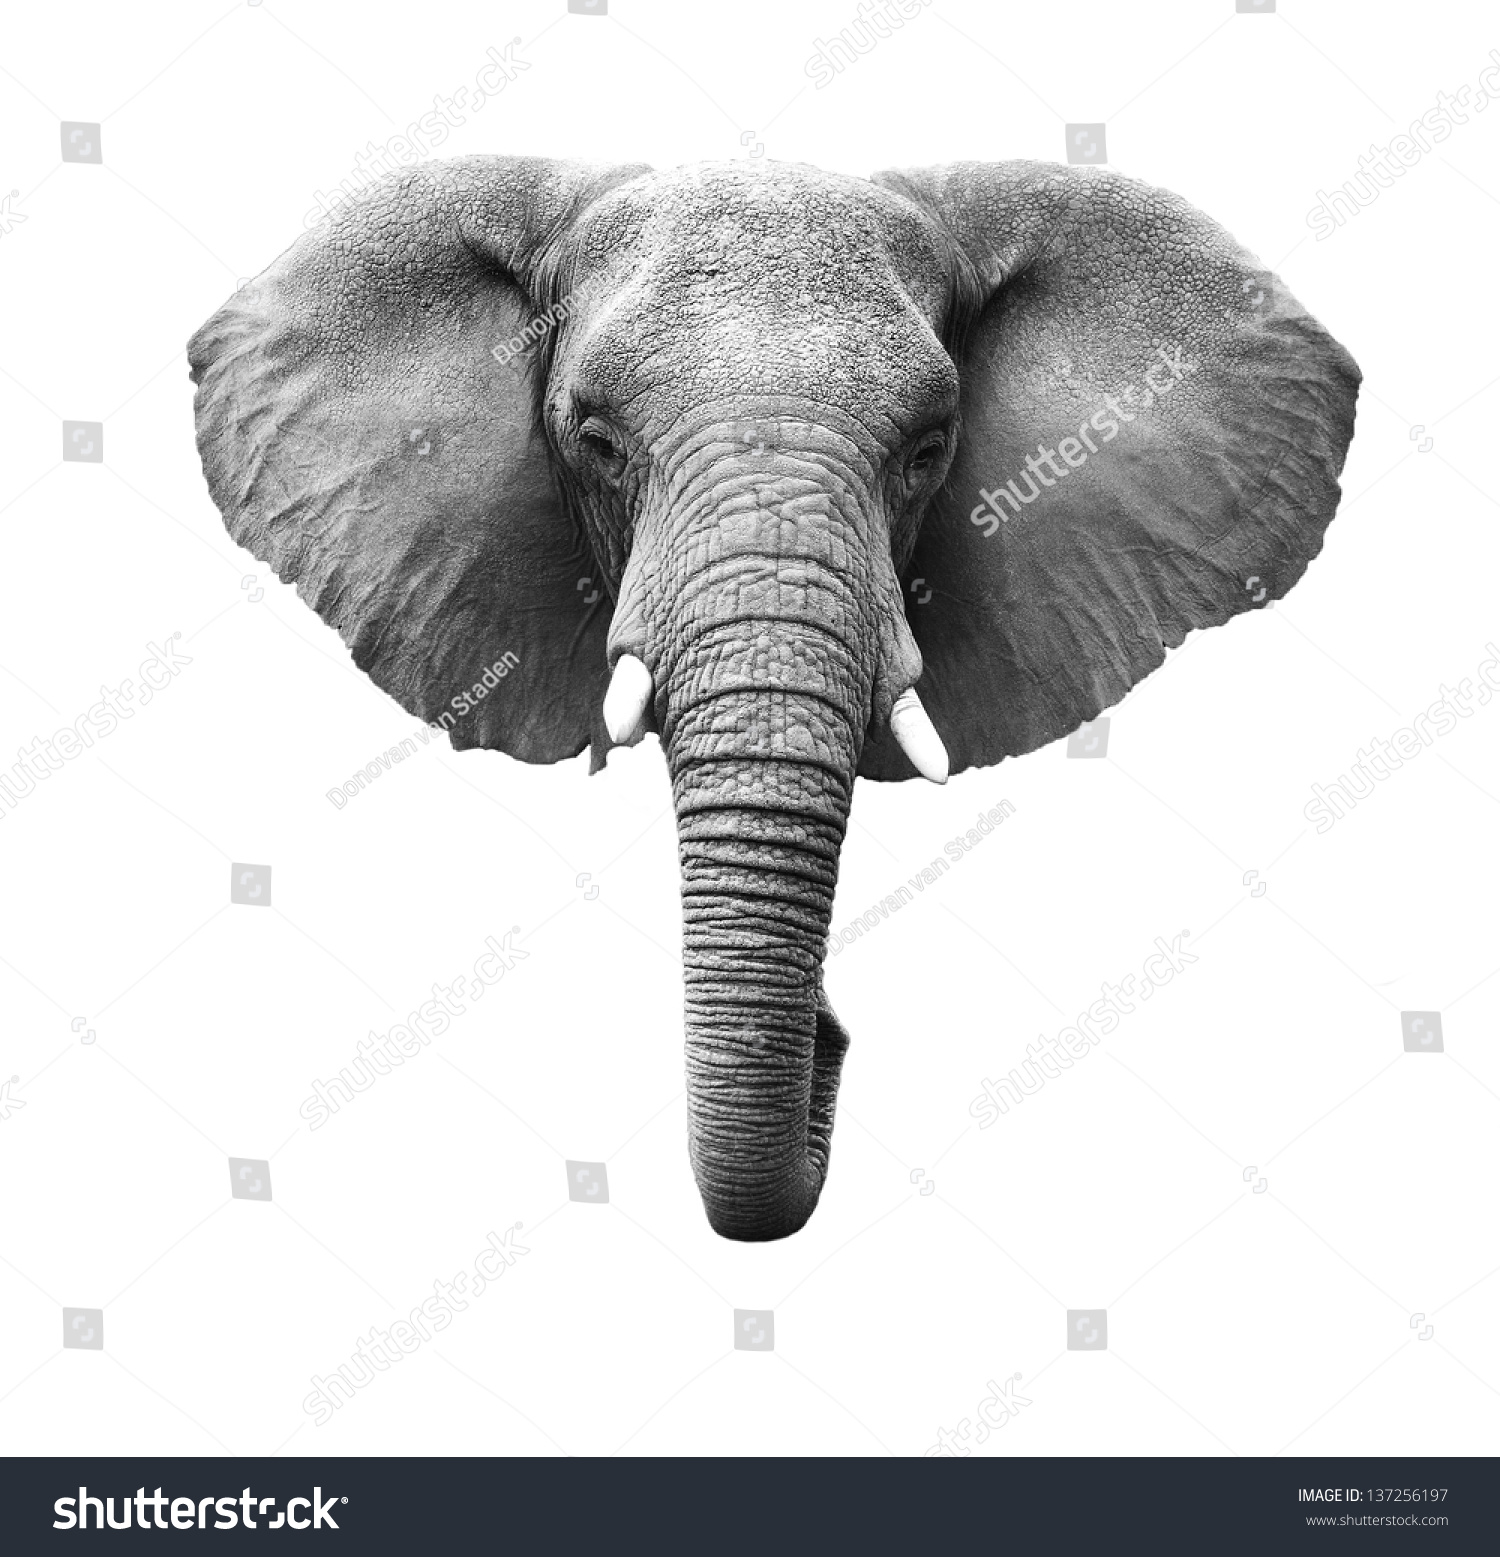 elephant clipart front view - photo #22